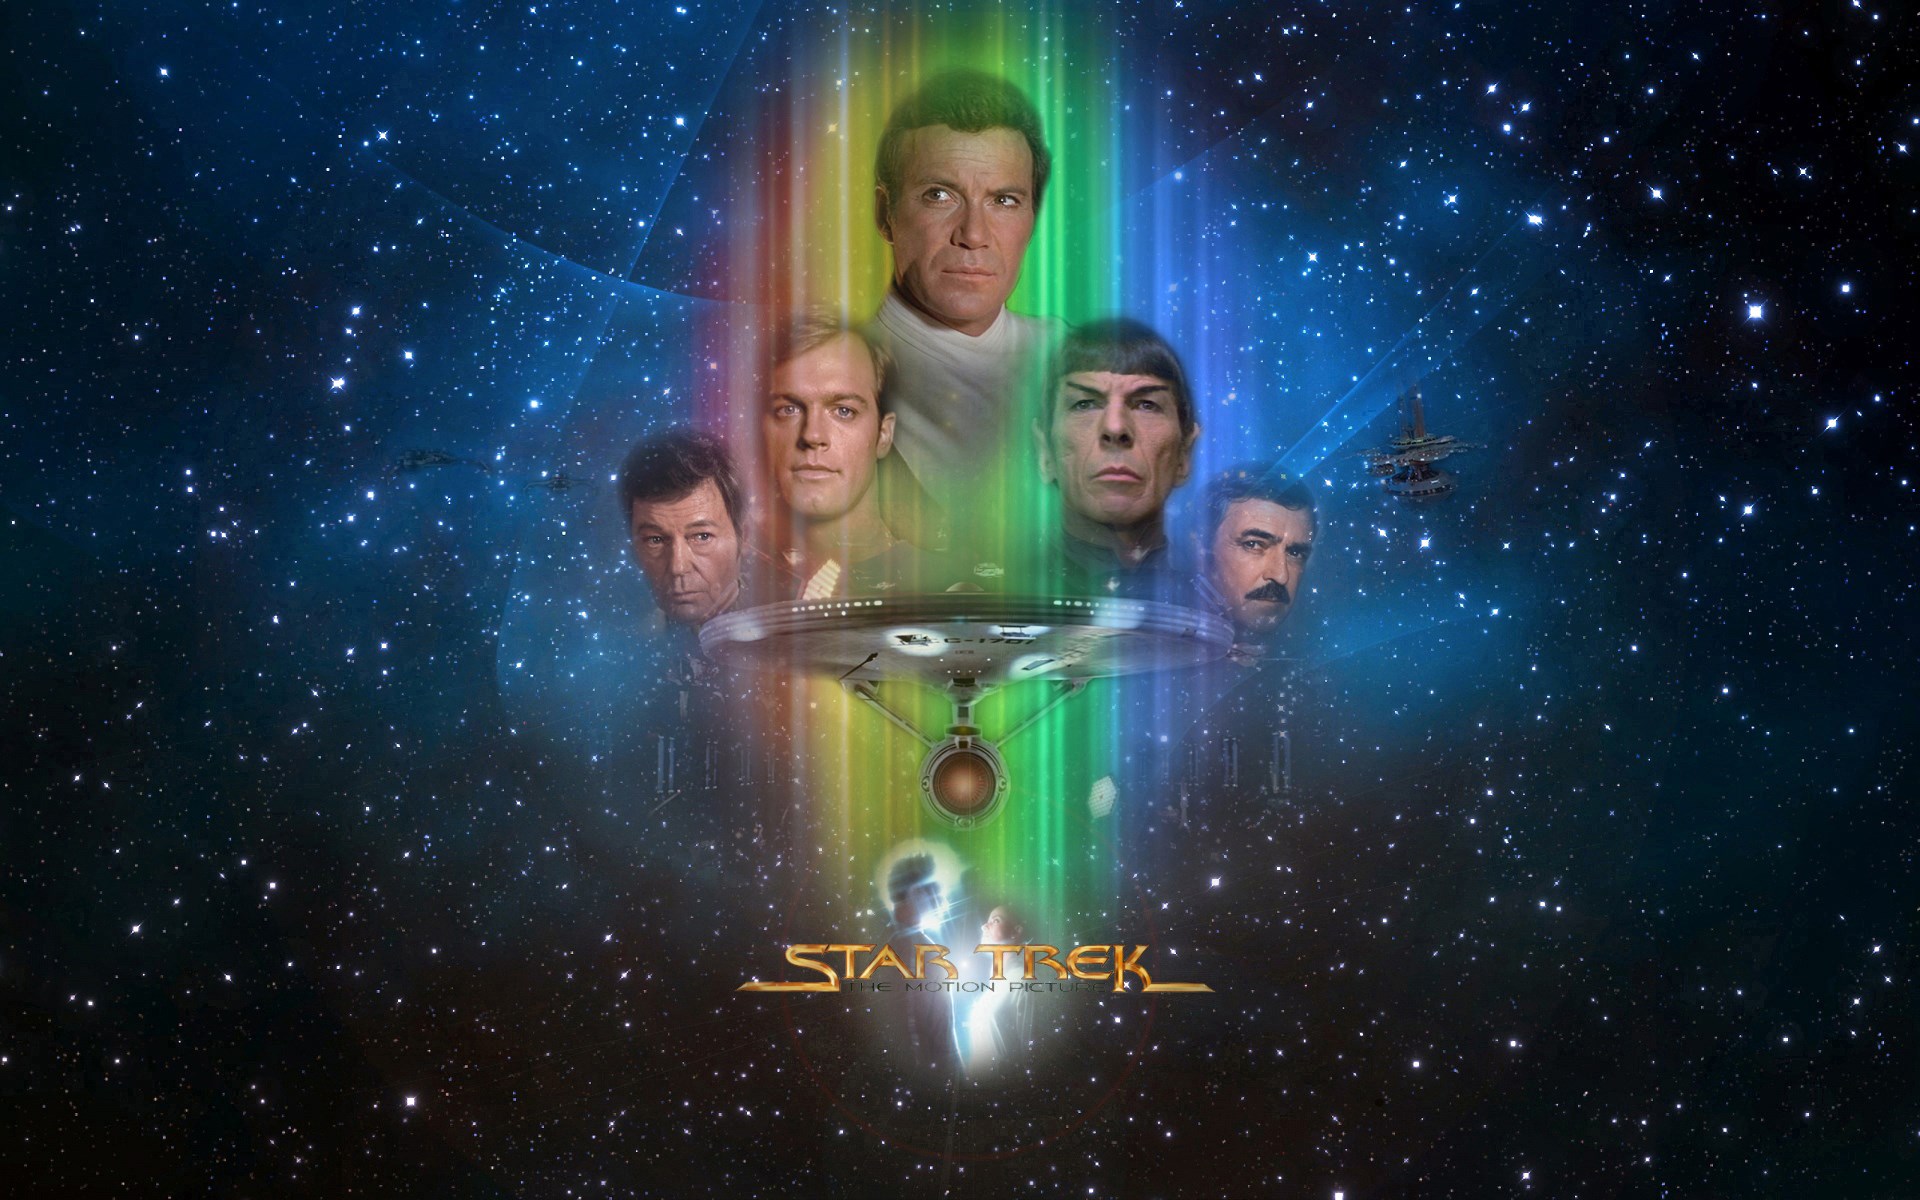 star trek the motion picture HD wallpaper, background